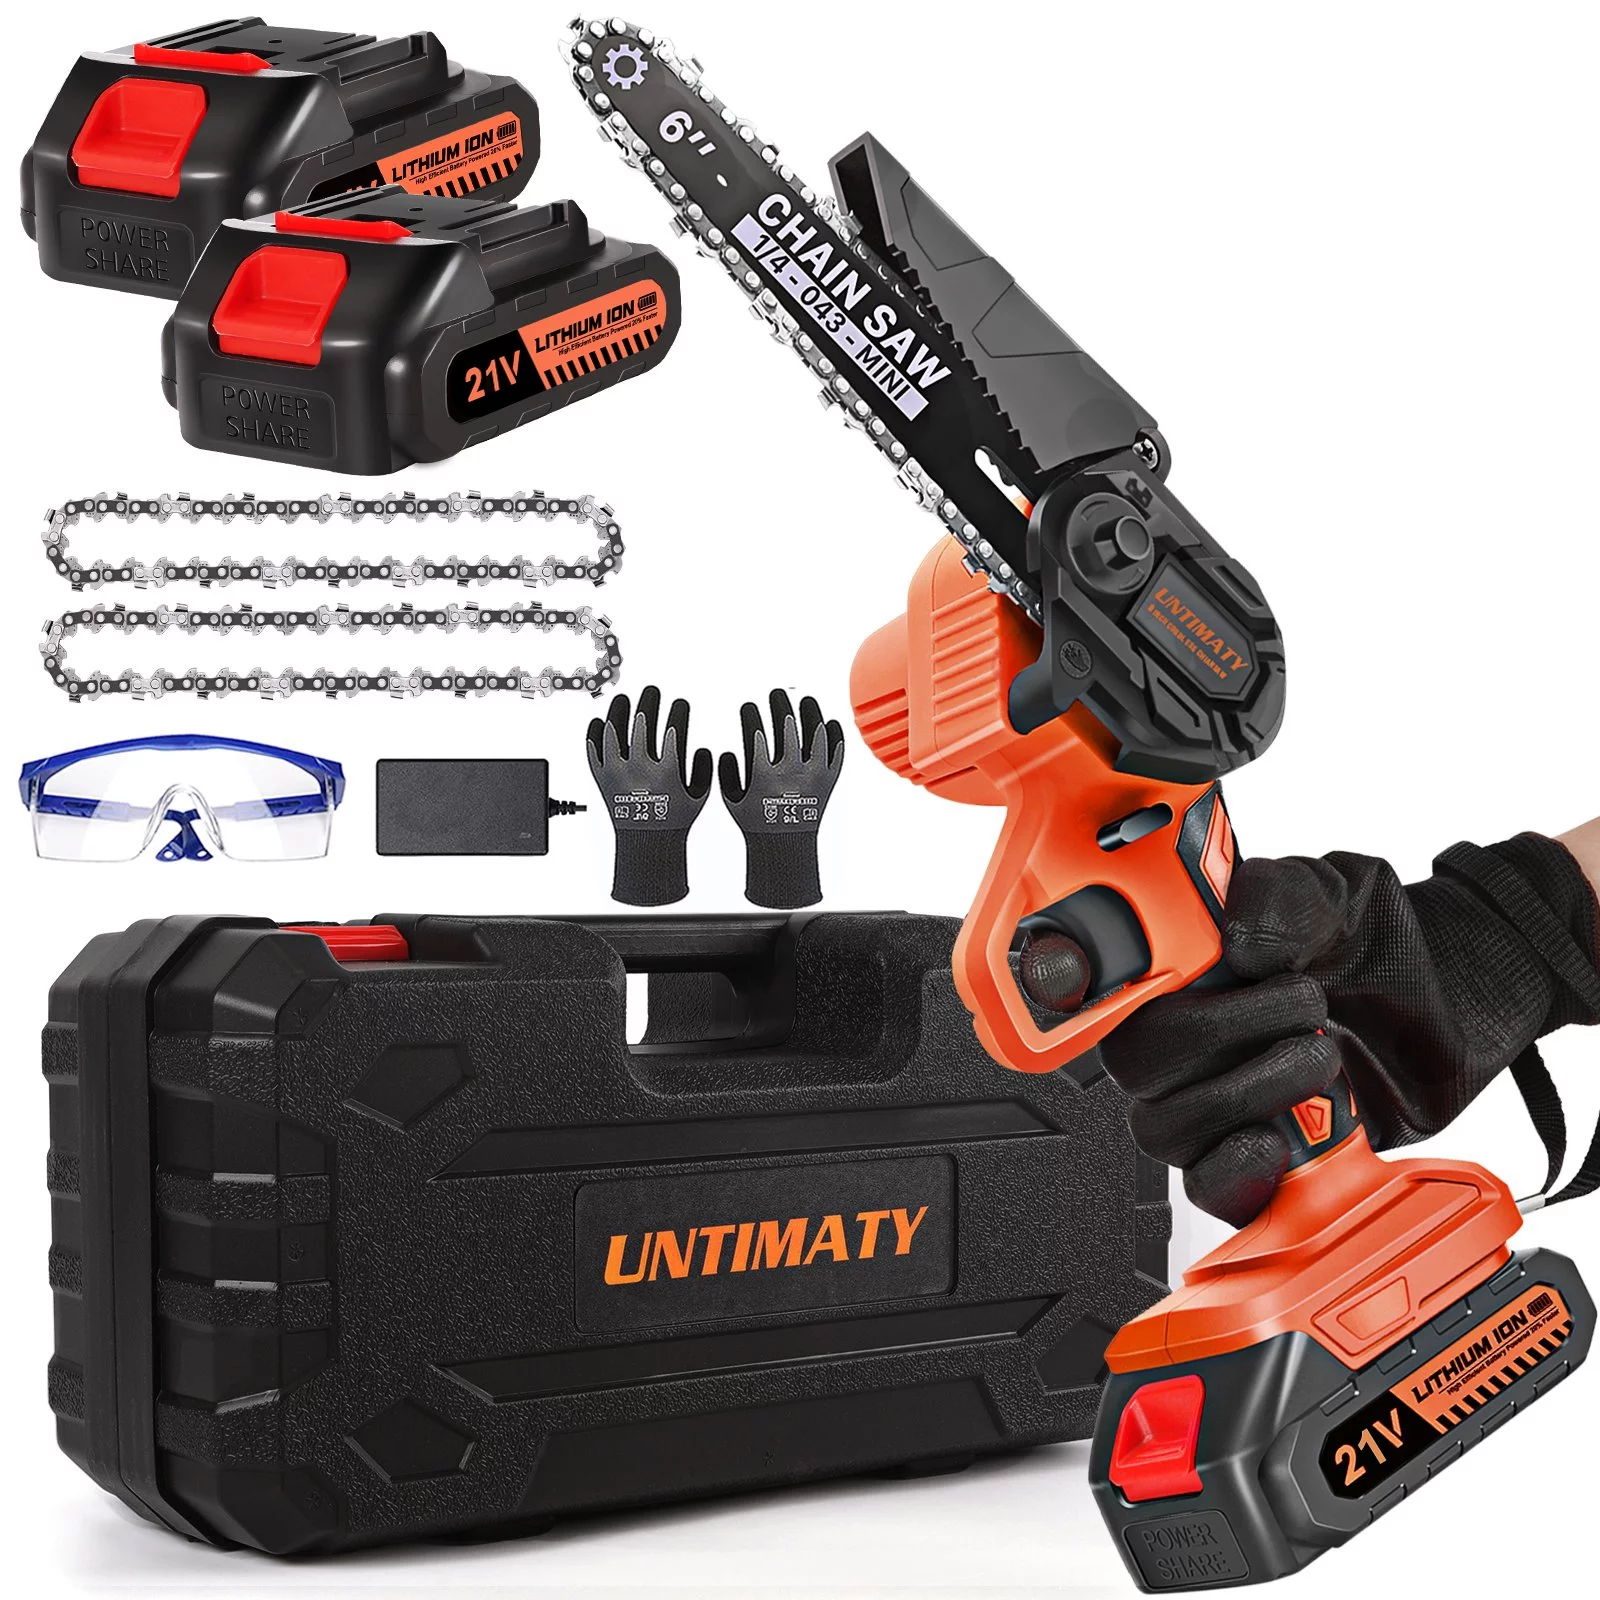 UNTIMATY 6" Mini Chainsaw with 2 Batteries 2 Chains, 6-Inch Cordless Handheld Chain Saw for Wood Cutting Tree Trimming